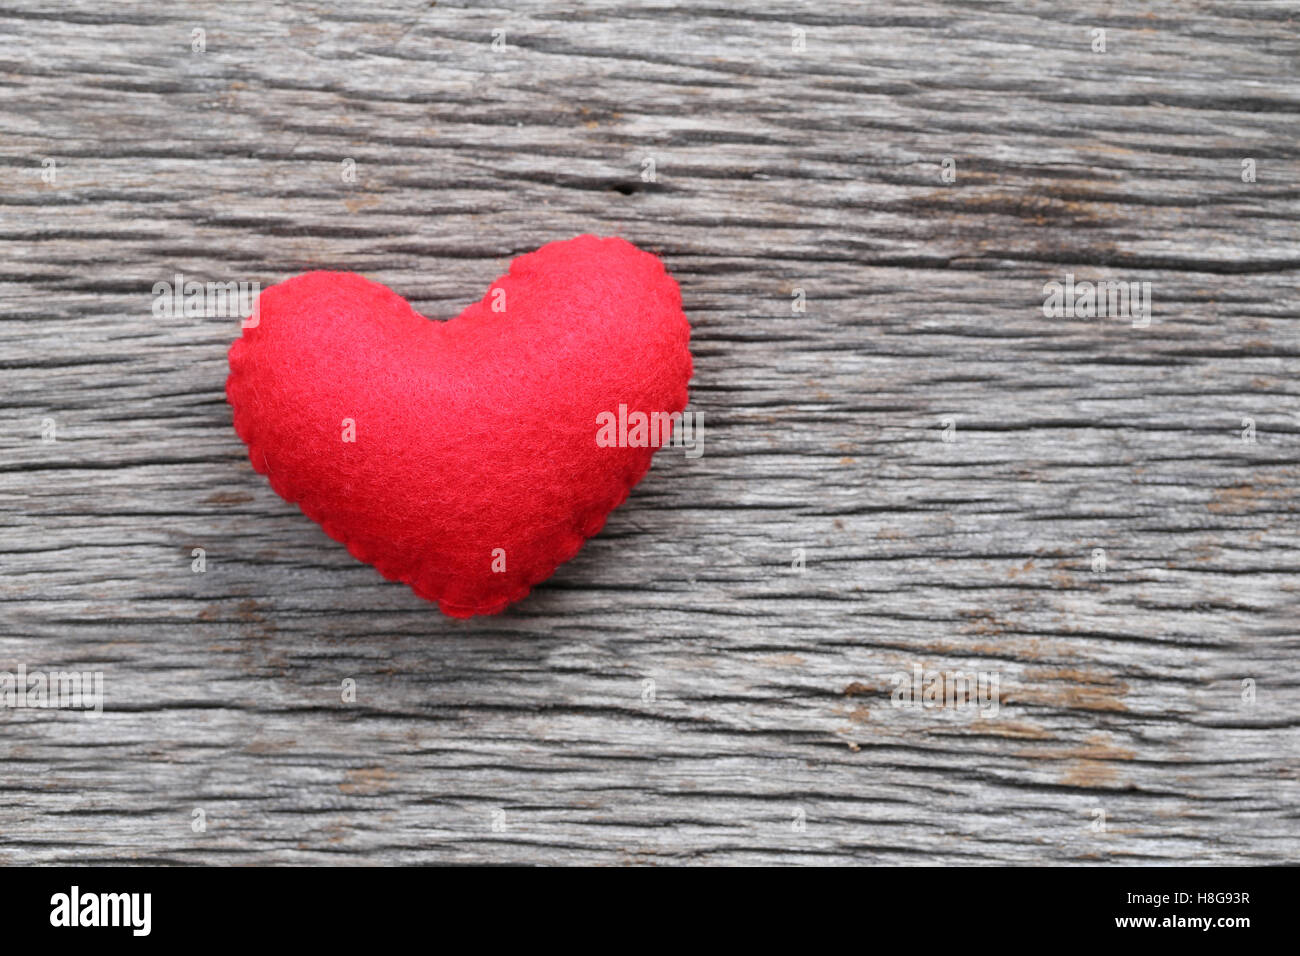 Red heart is placed on a wooden floor concept of love in Valentine's Day. Stock Photo